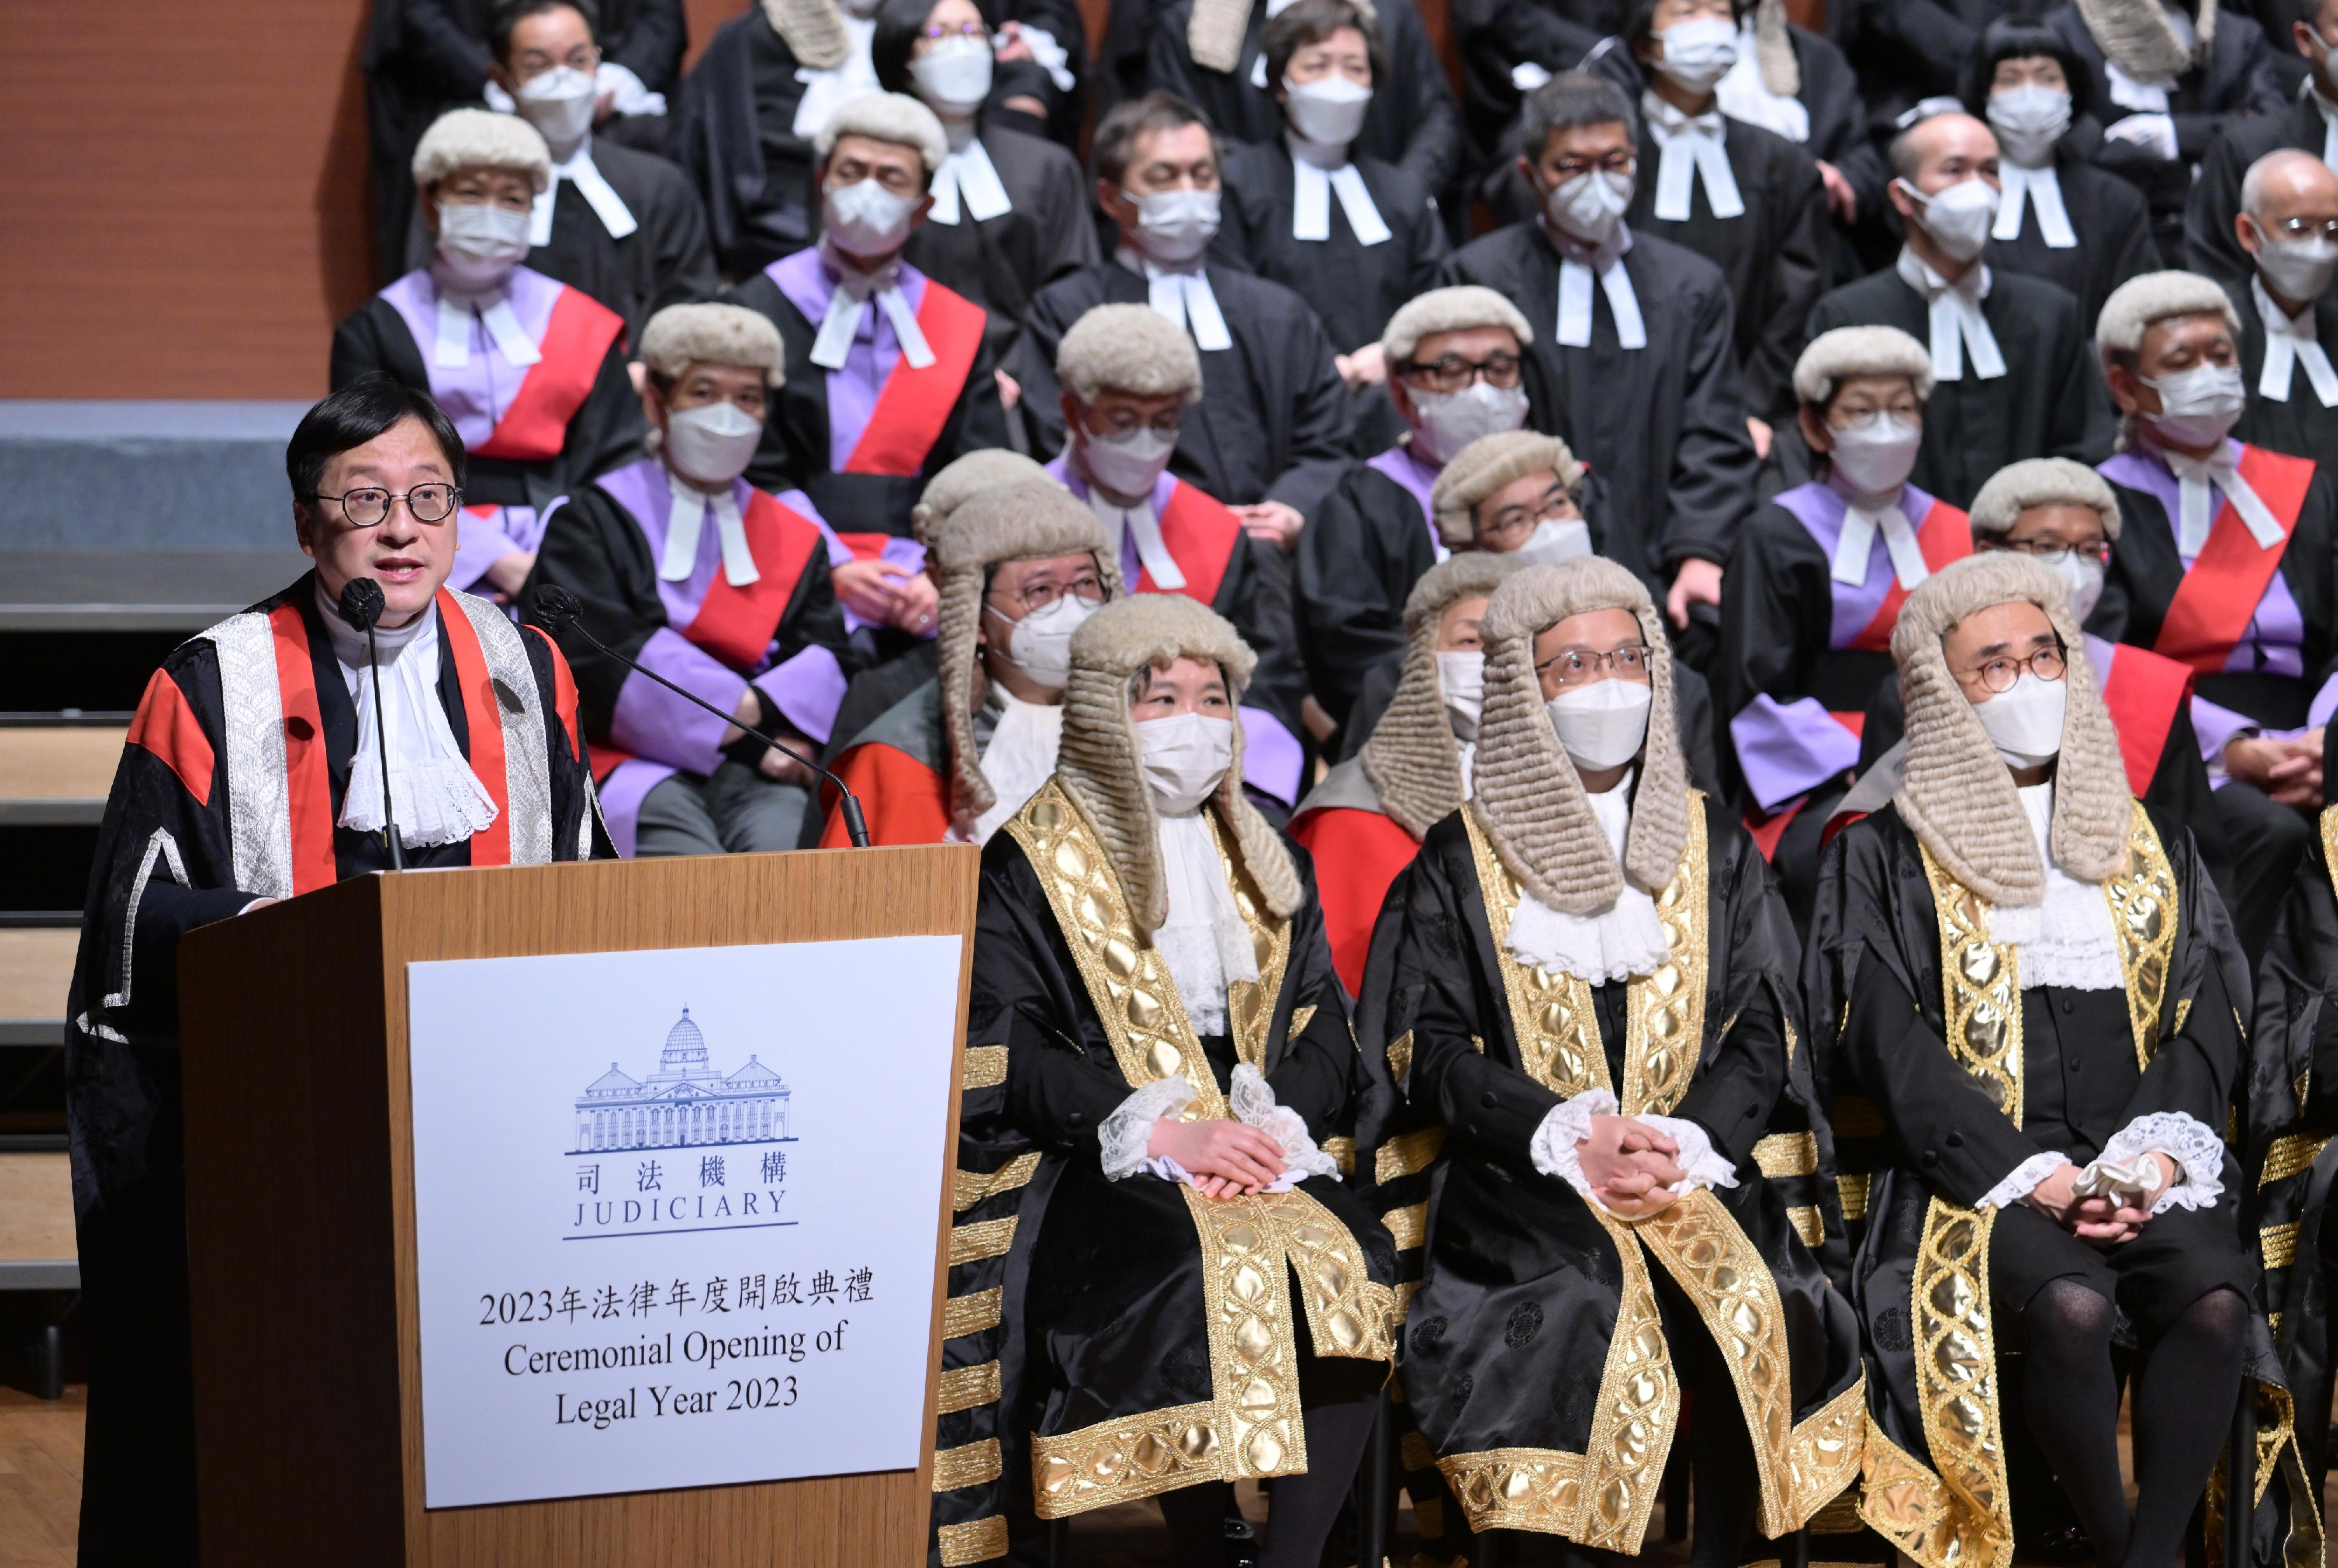 The President of the Law Society of Hong Kong, Mr Chan Chak-ming, today (January 16) gives an address at the Ceremonial Opening of the Legal Year 2023.